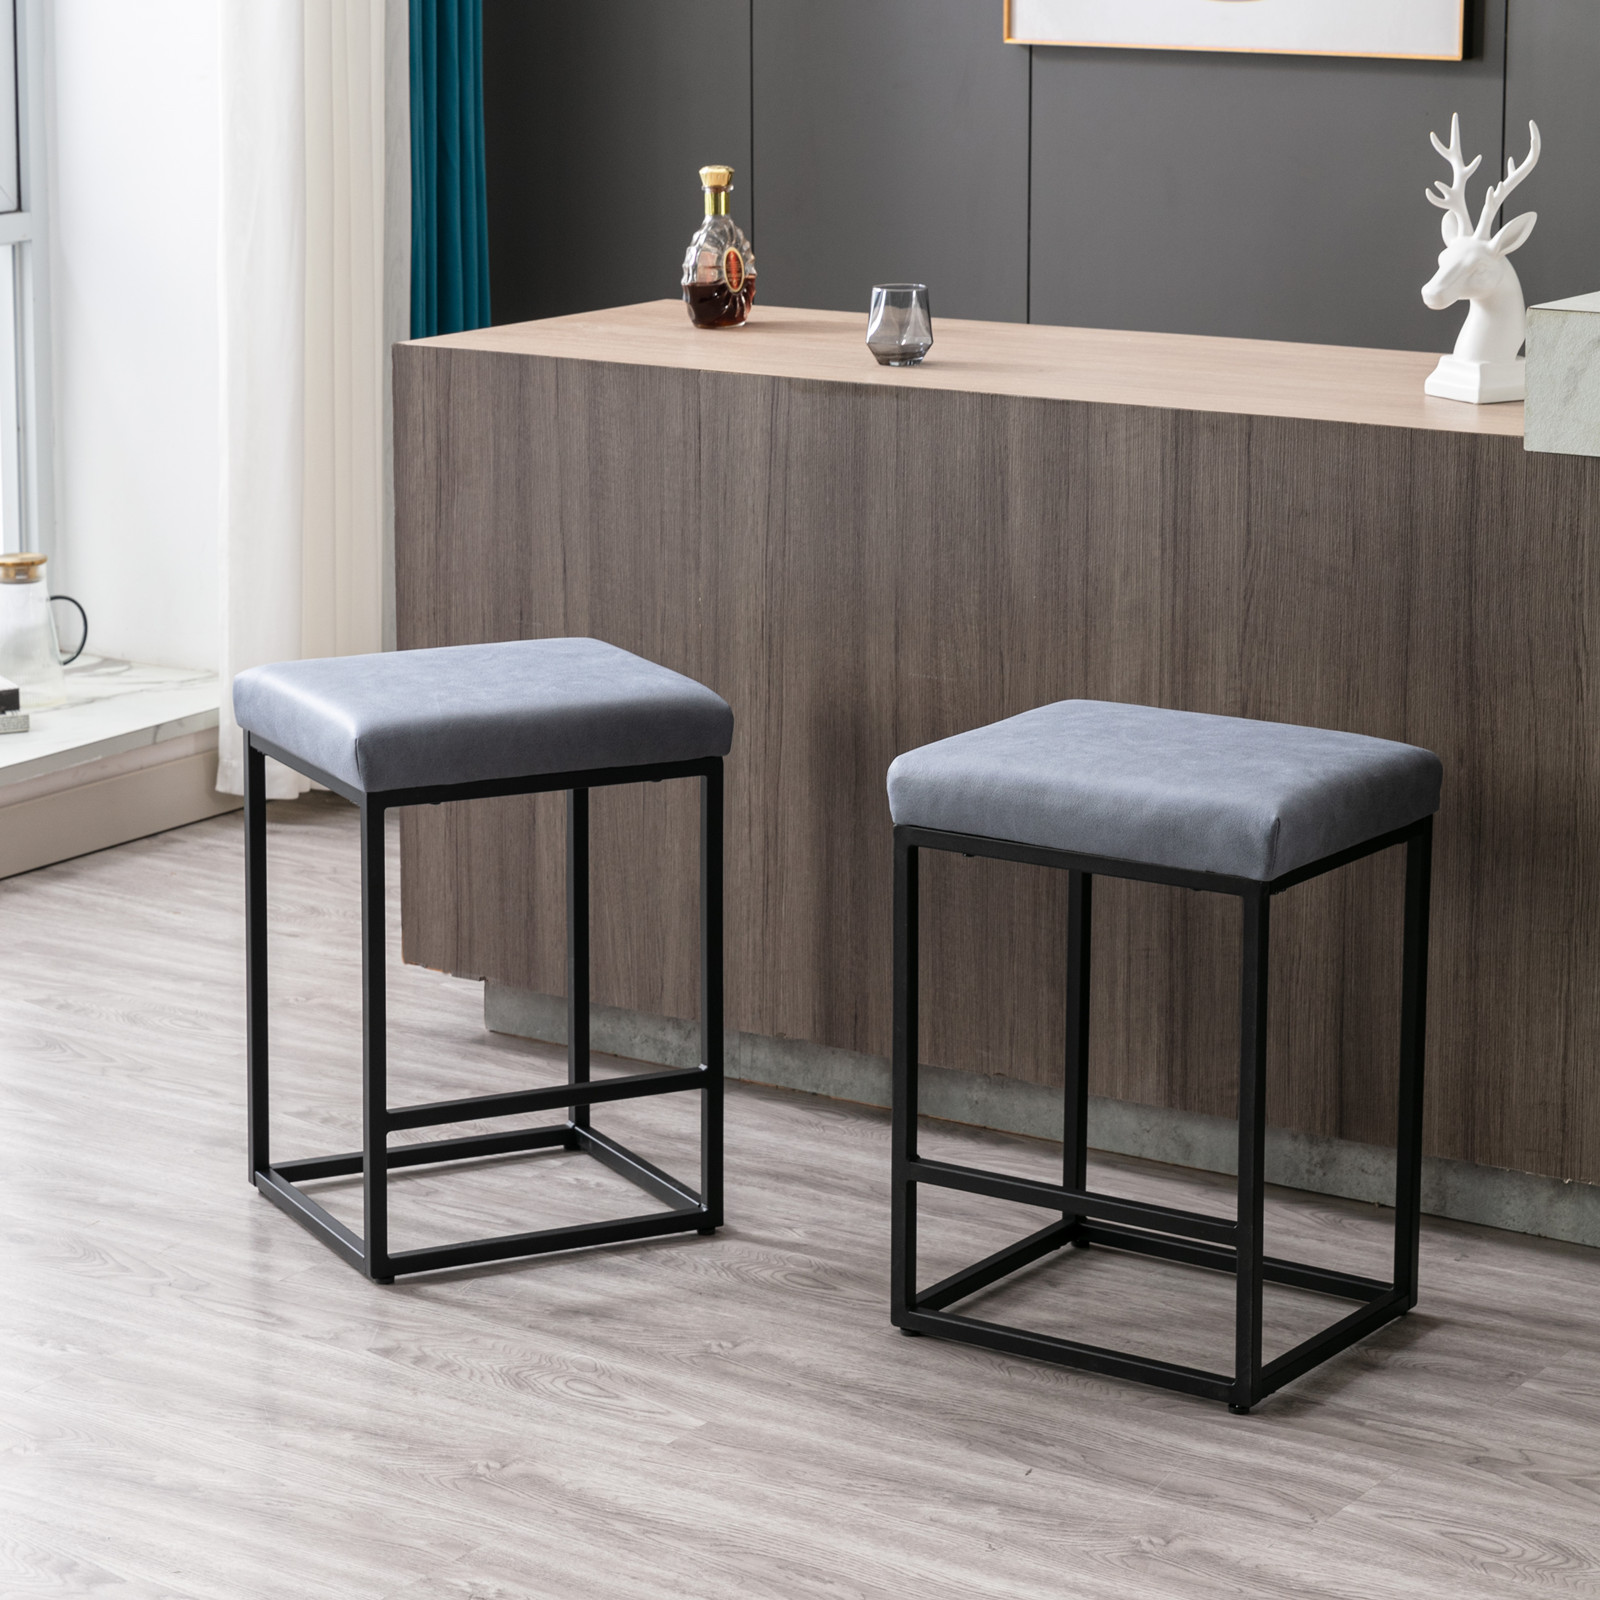 Set of 2 Industrial Upholstered Faux Leather Bar Stools, Modern Square Counter Backless Counter Height 24" Bar Stools for Dining Room, Kitchen, Island, Counter and Pub, Blue - image 1 of 7